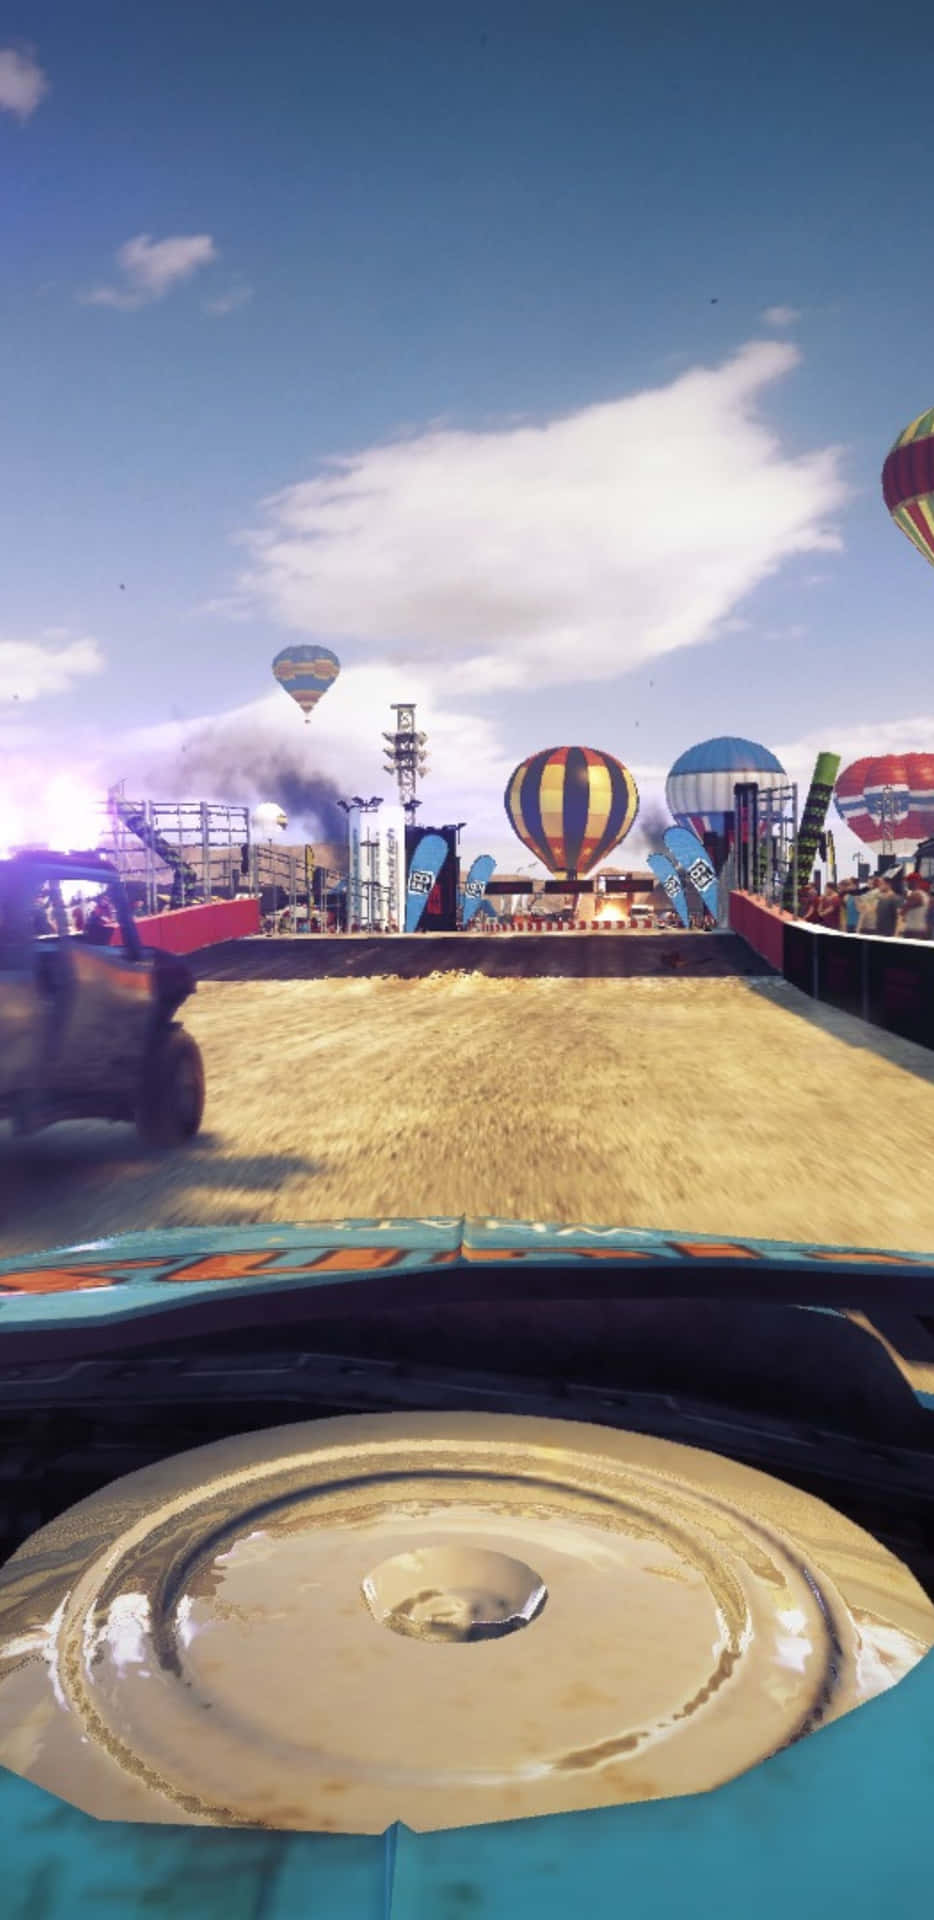 A Screenshot Of A Game With A Car And Hot Air Balloons